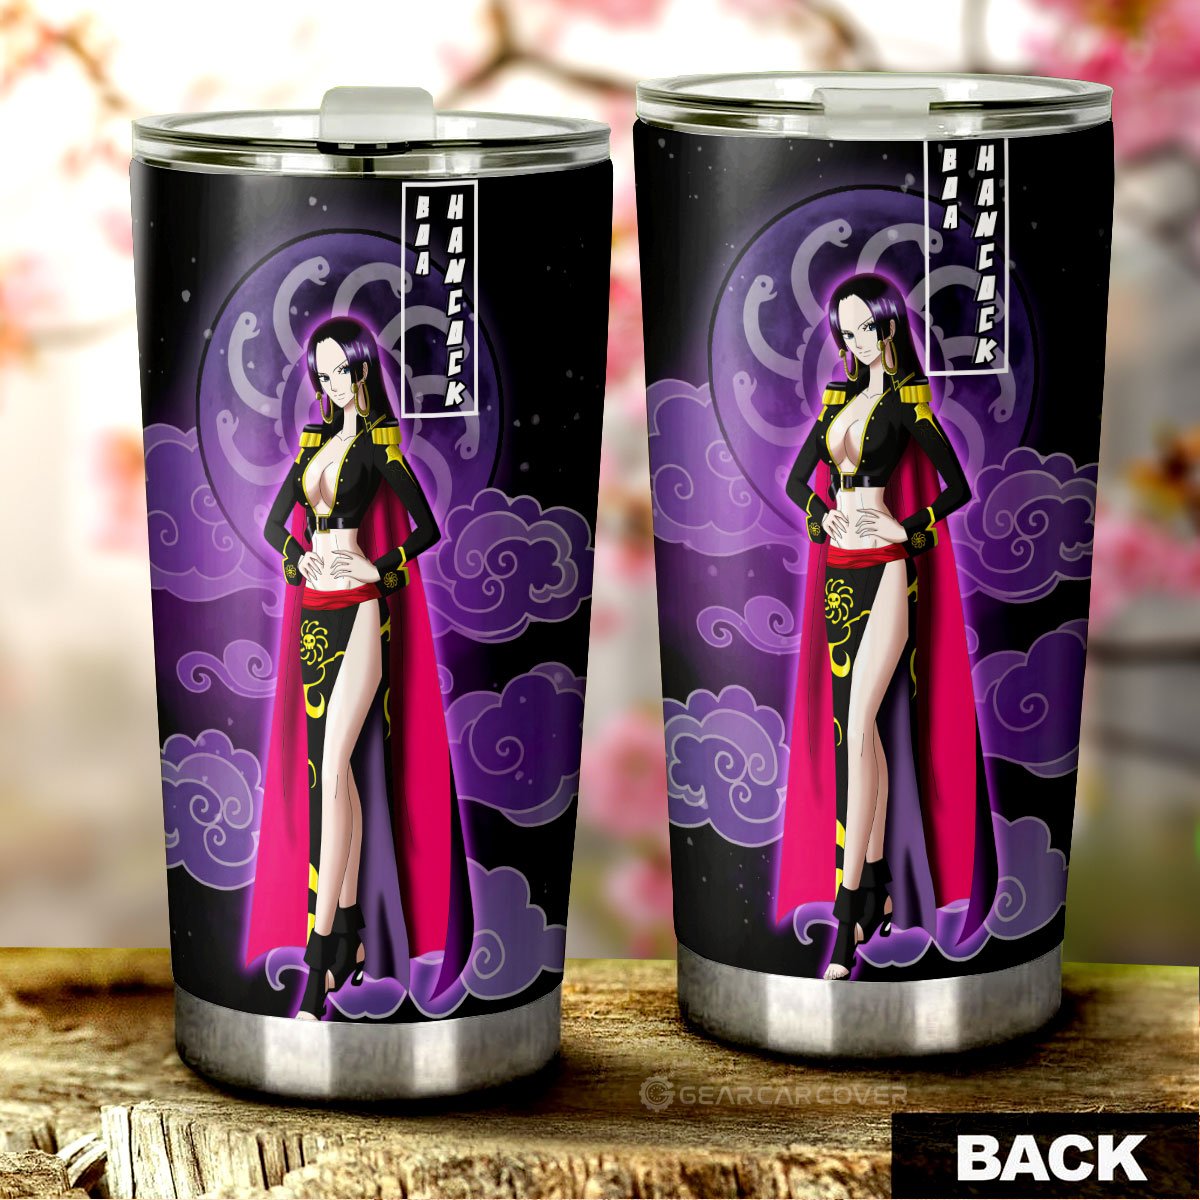 Boa Hancock Tumbler Cup Custom One Piece Anime Car Accessories For Anime Fans - Gearcarcover - 3